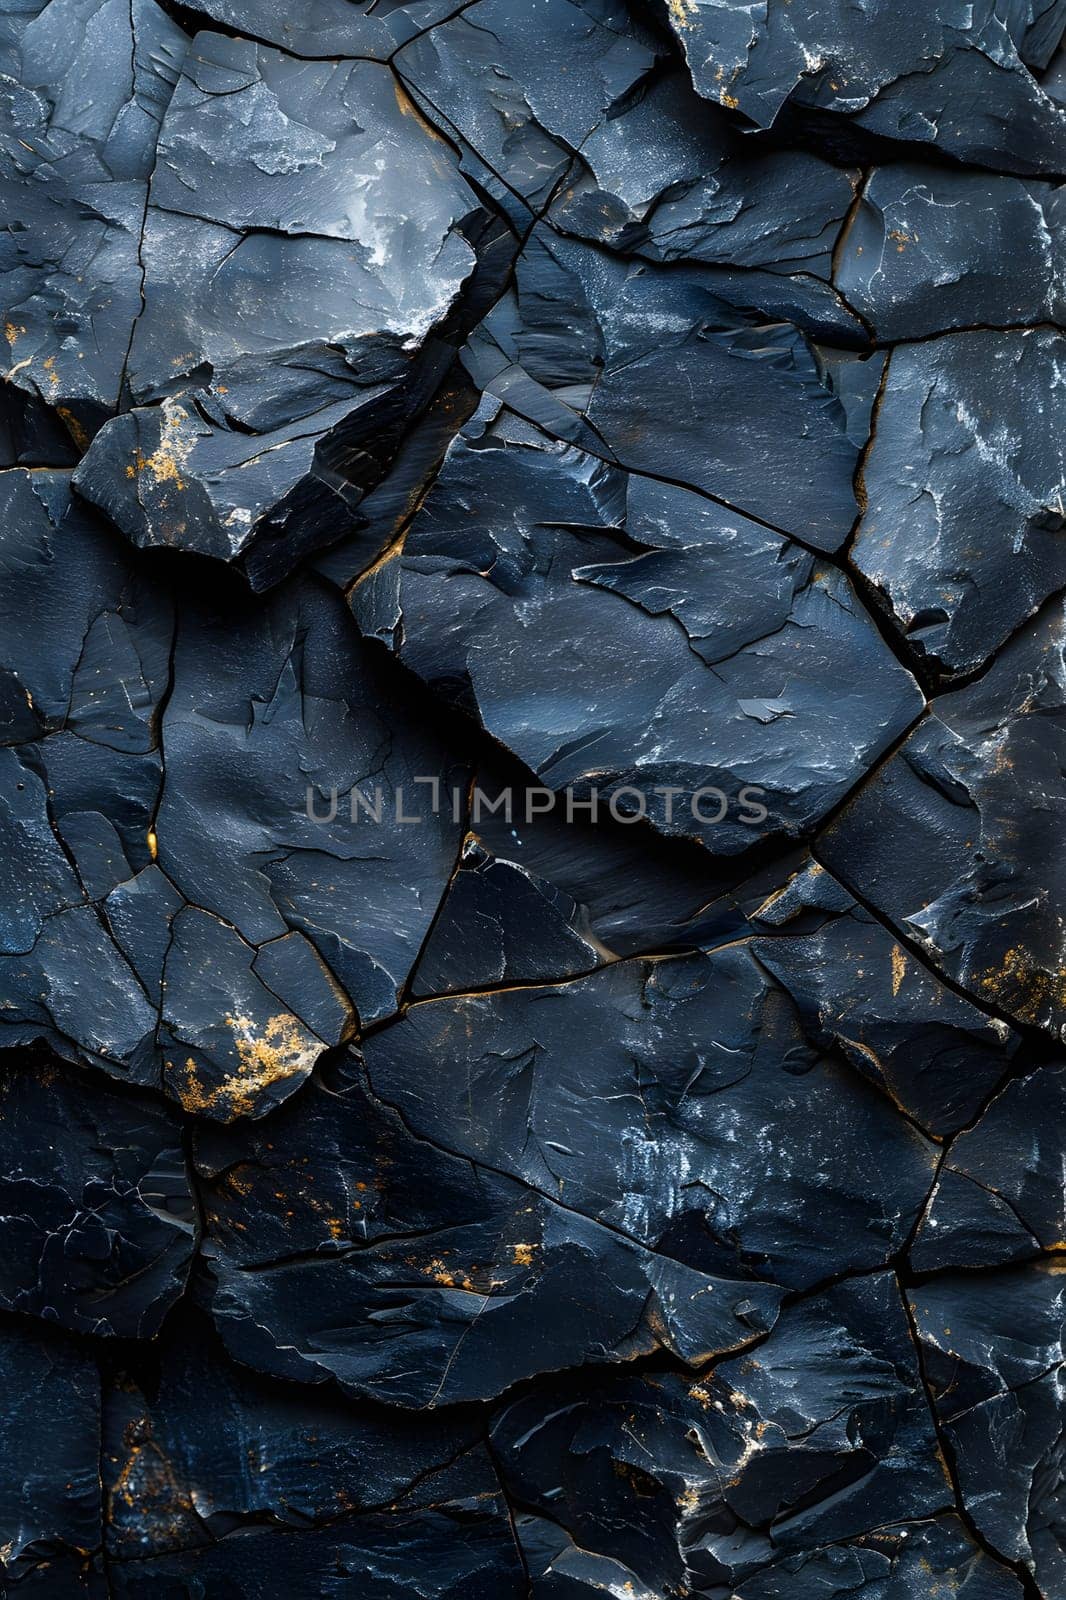 An upclose view of a black bedrock with shimmering gold spots resembling an electric blue pattern on liquid flooring